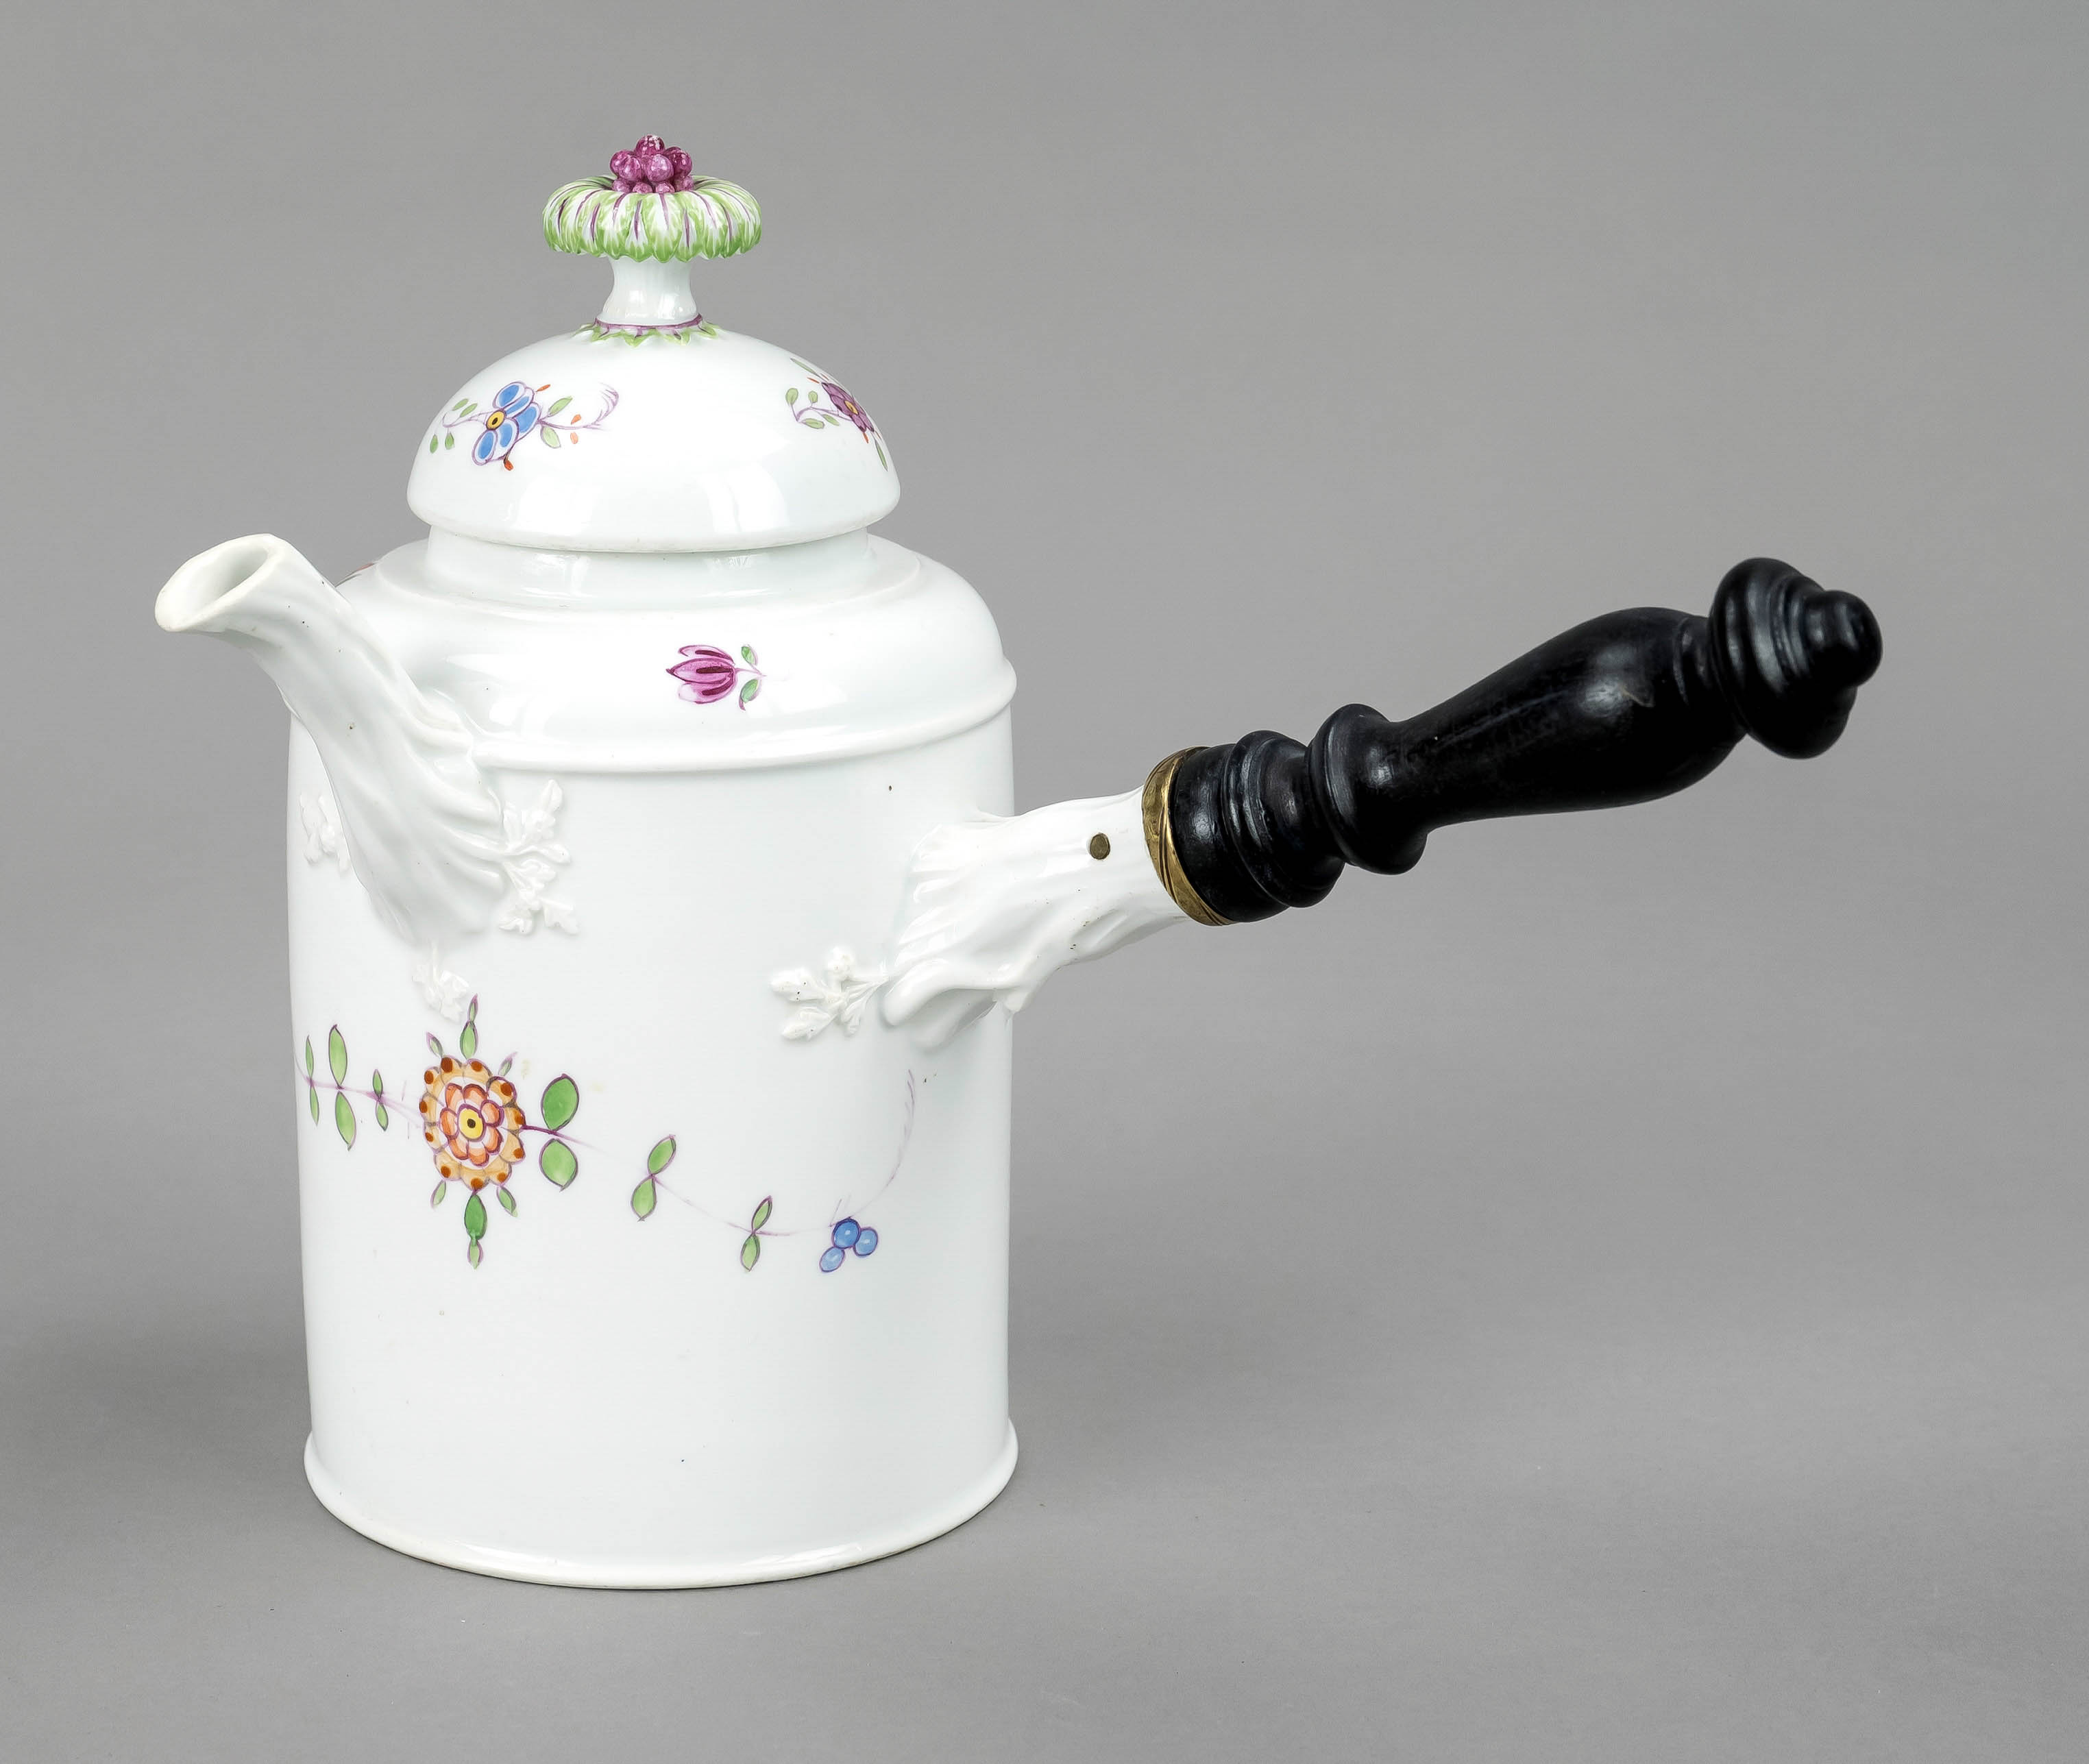 Chocolate pot, Meissen, Marcolini mark 1774-1814, cylindrical form with wooden handle on the side,